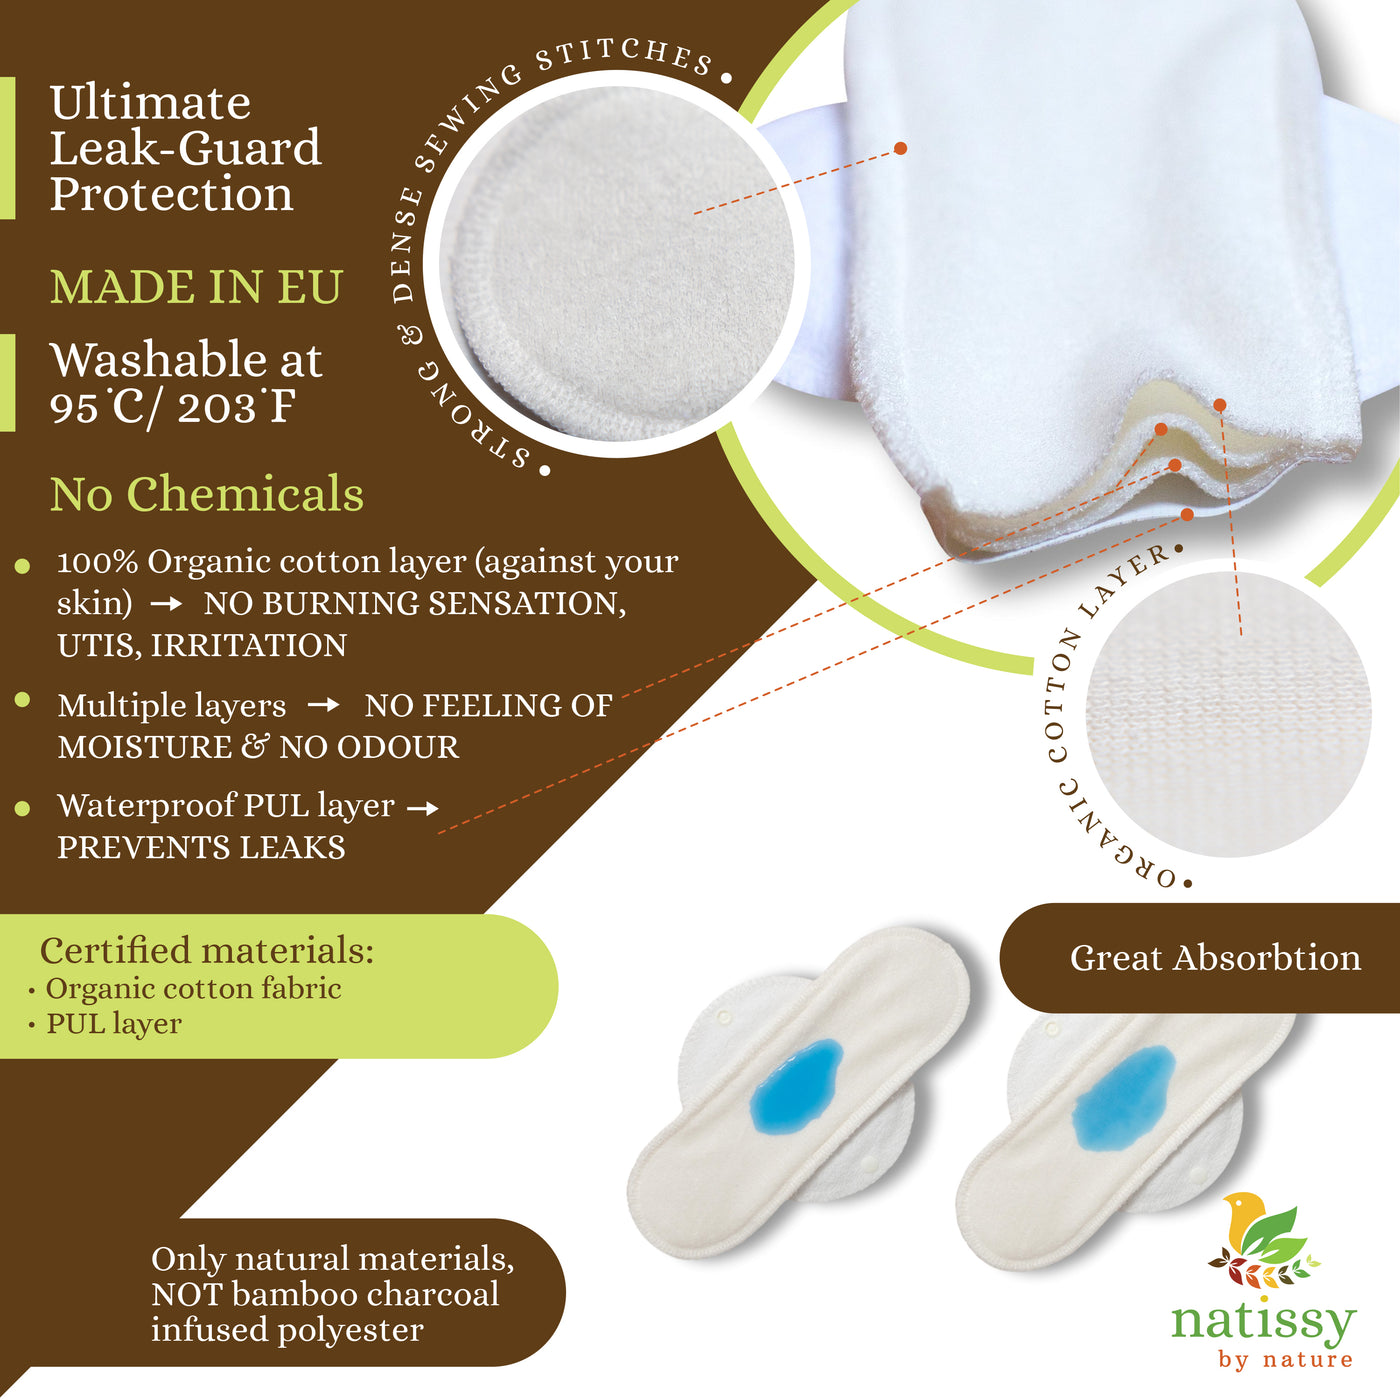 Reusable Menstrual Pads, 6-Pack Organic Cotton Reusable Sanitary Towels with Wings (size S & M), MADE IN EU, for Menstrual Periods and Incontinence; EXTRA Double Wet Bag with Strap; Washable Menstrual Cloth